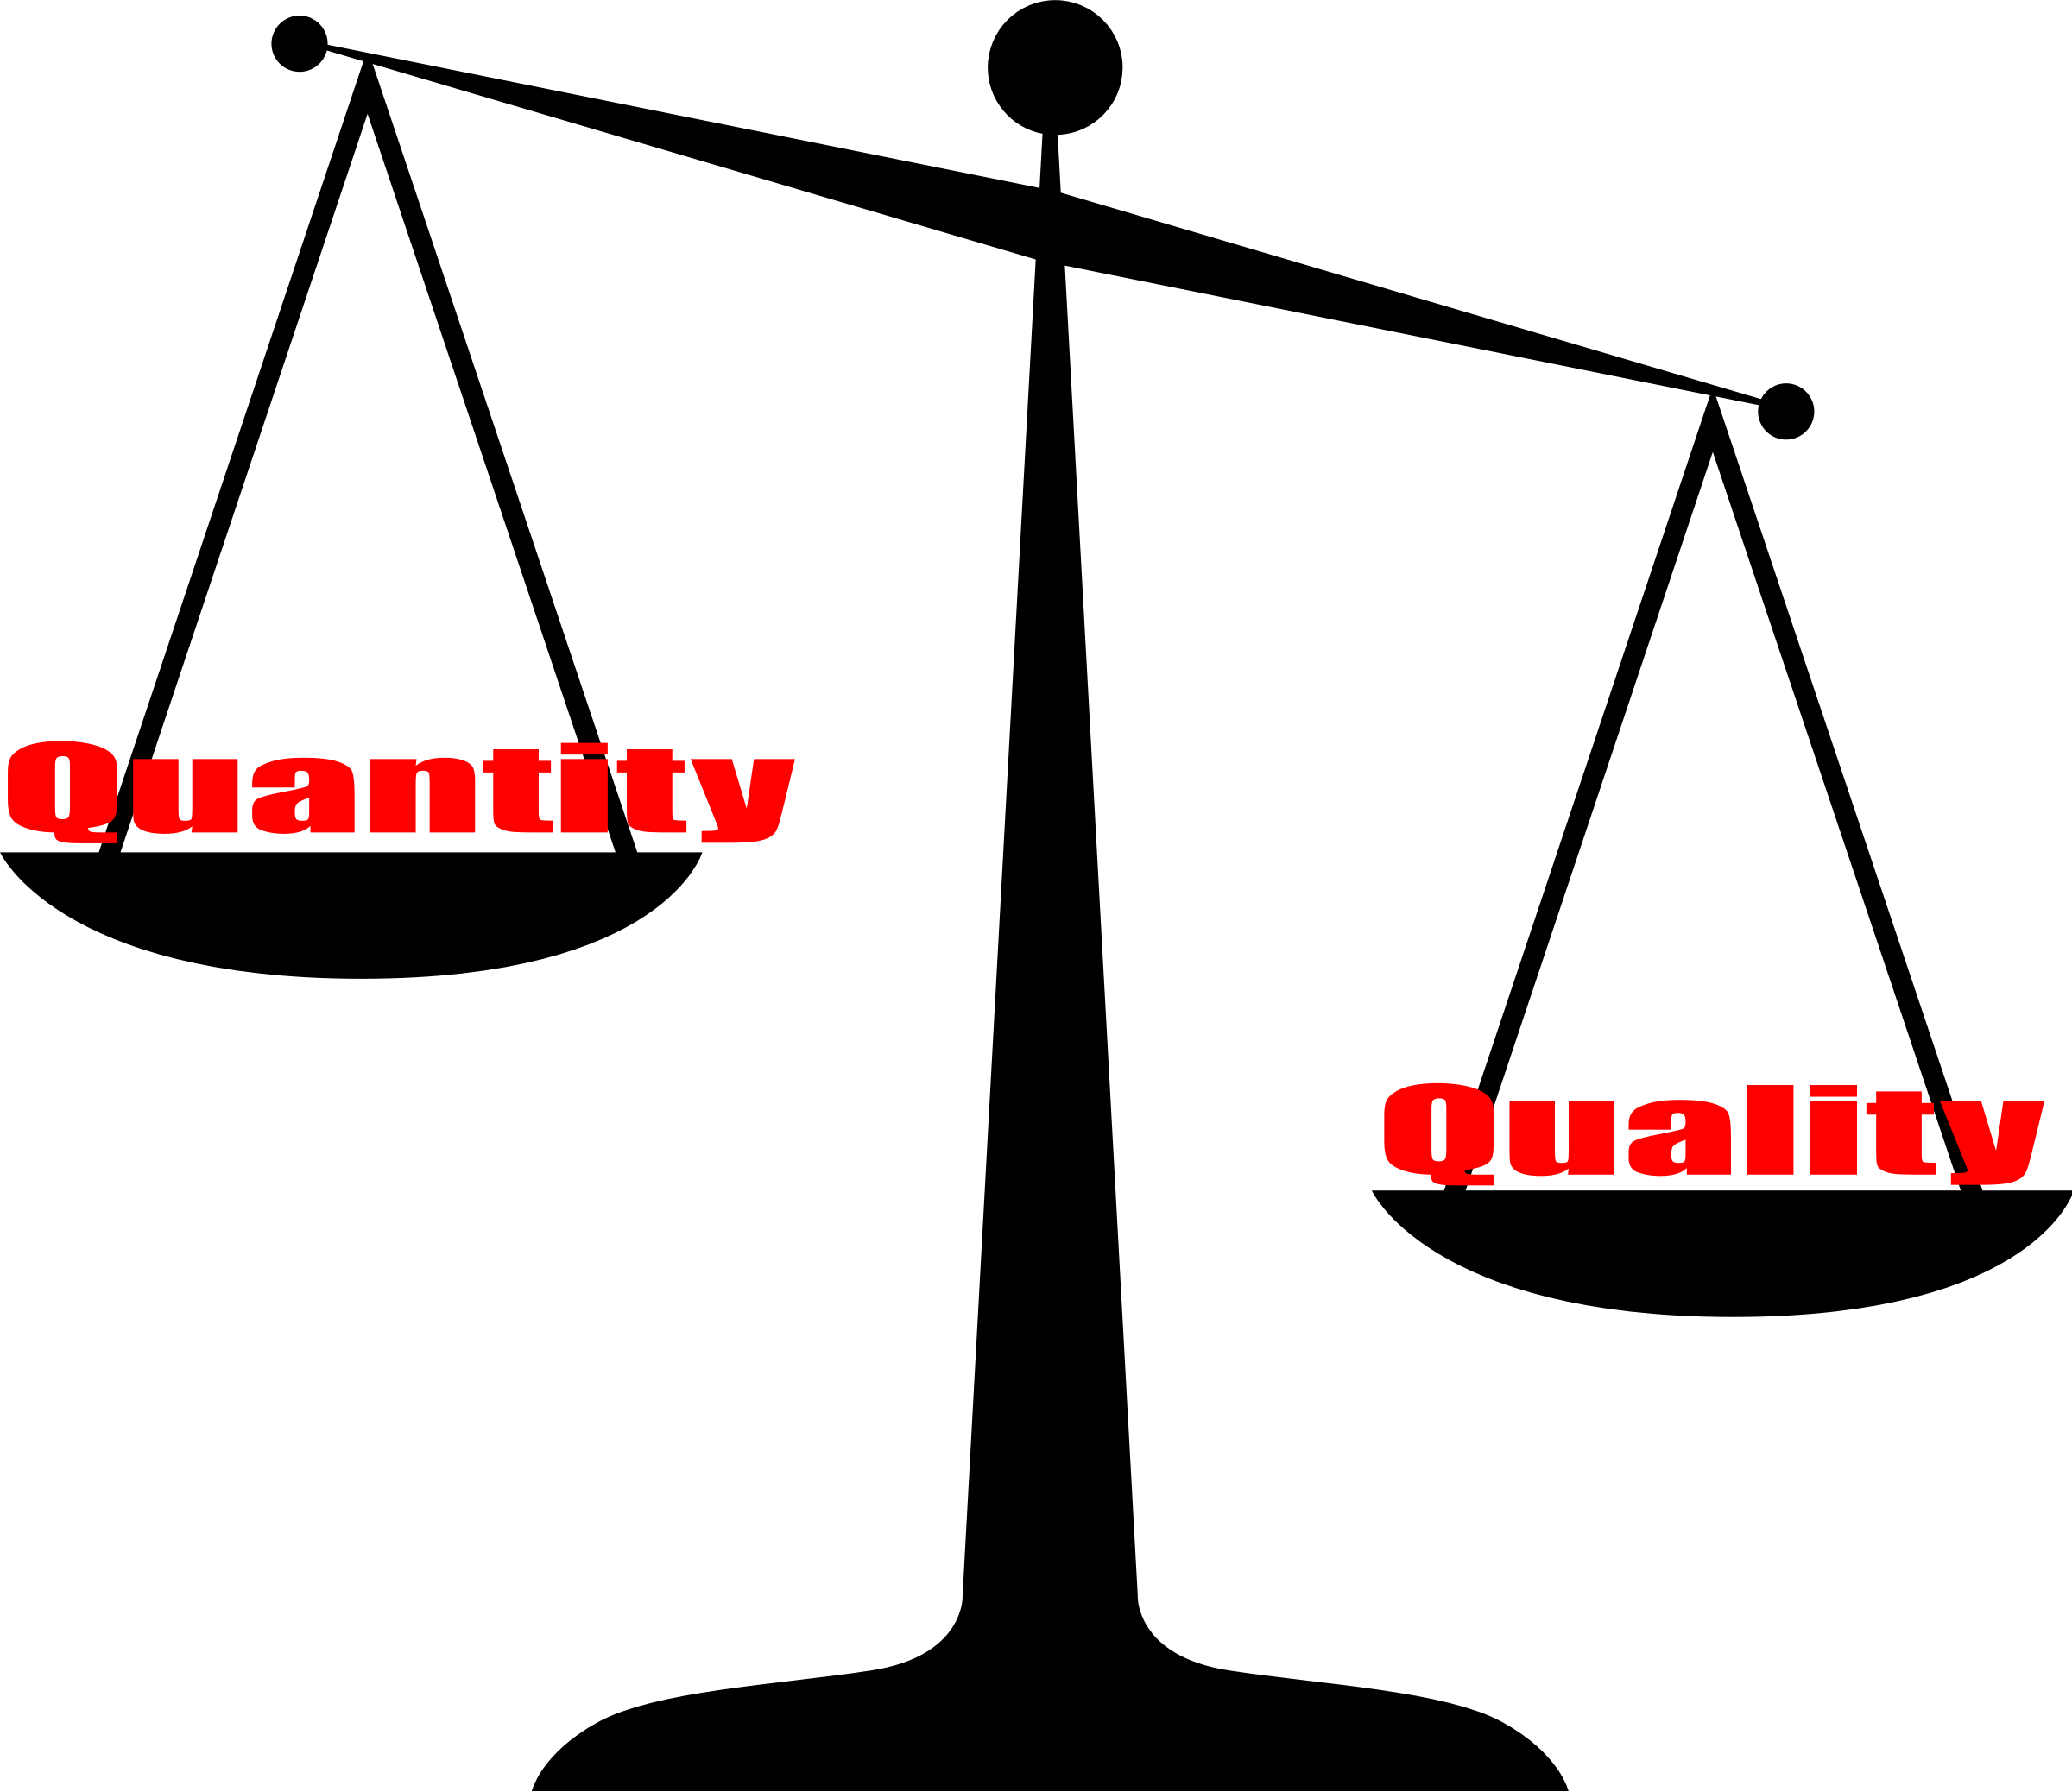 This Free Icons Png Design Of Quality Vs Quantity - Scales Of Justice Clip Art (2400x2076)